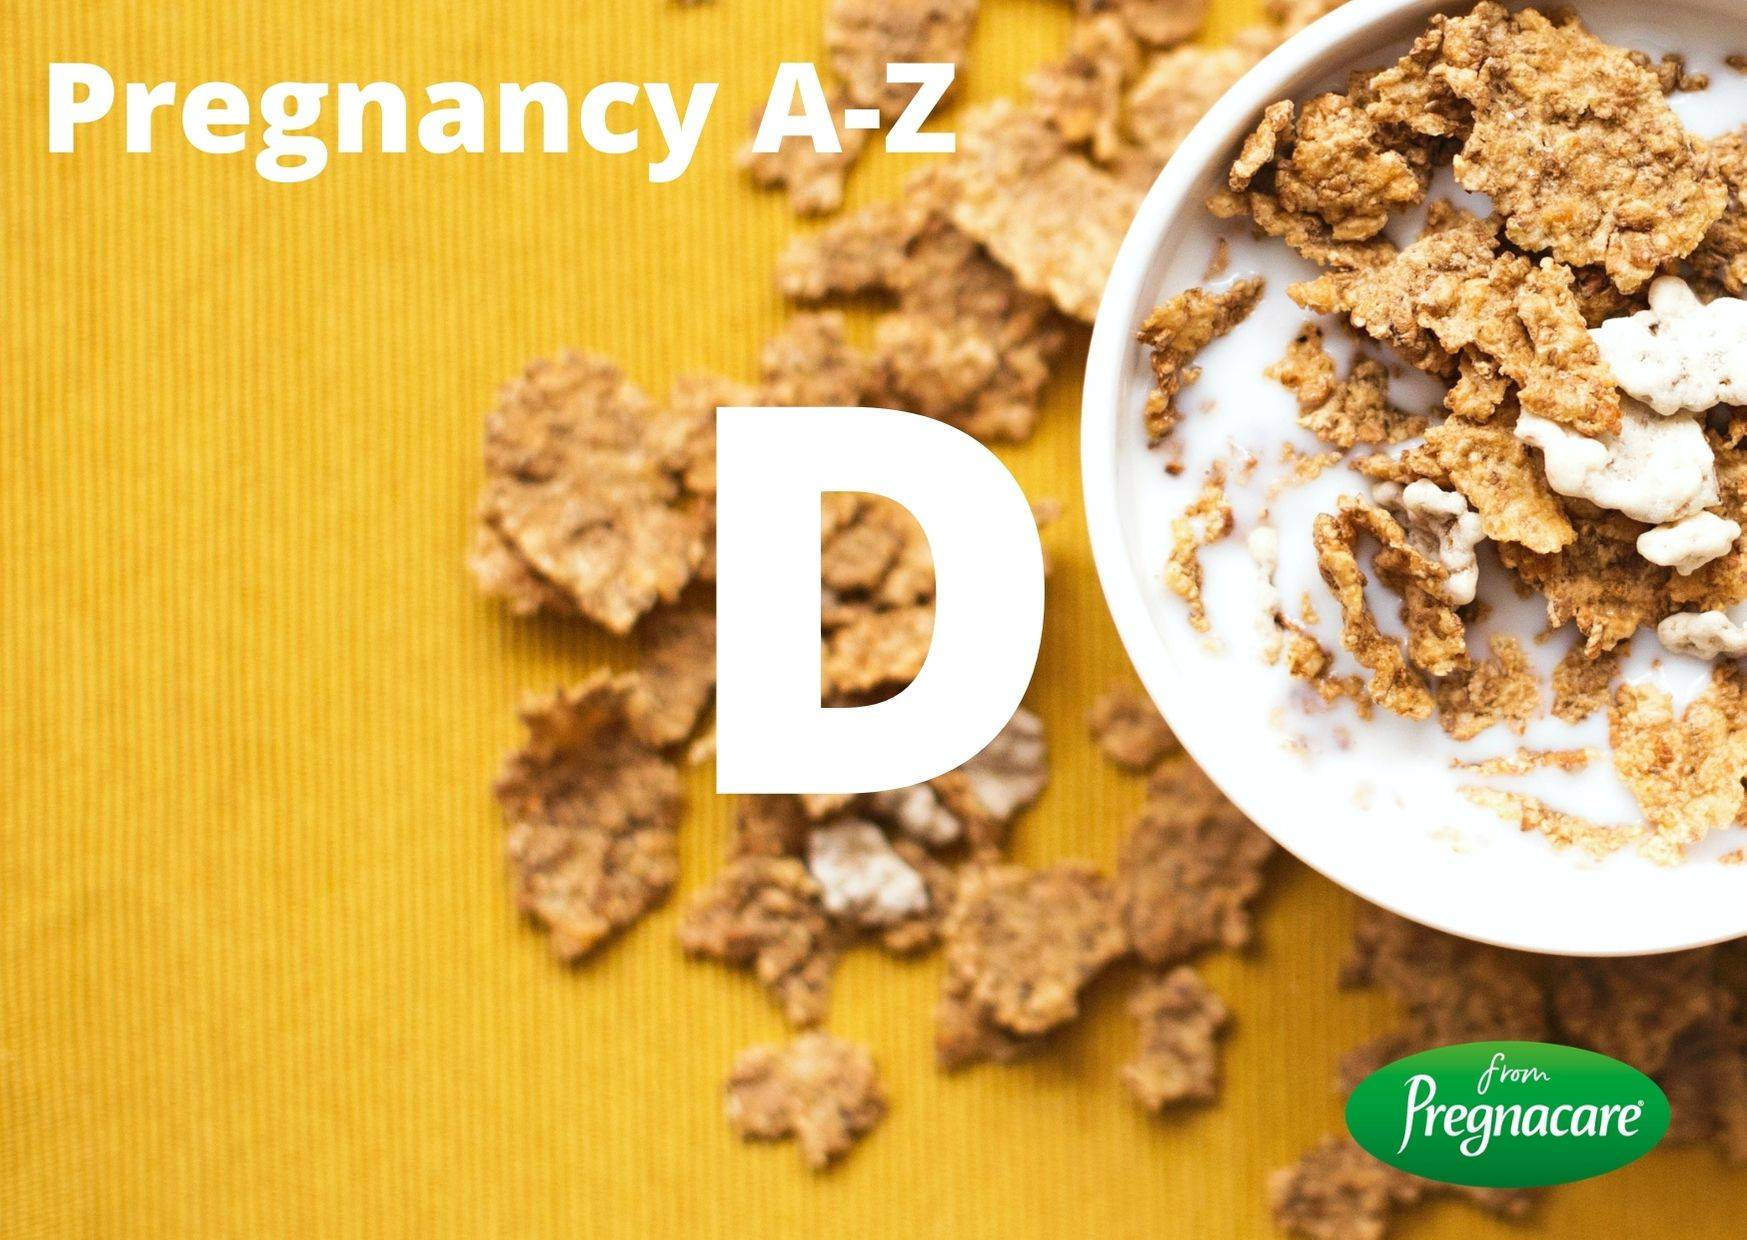 Pregnancy A-Z guide to pregnancy and nutrition - the letter D